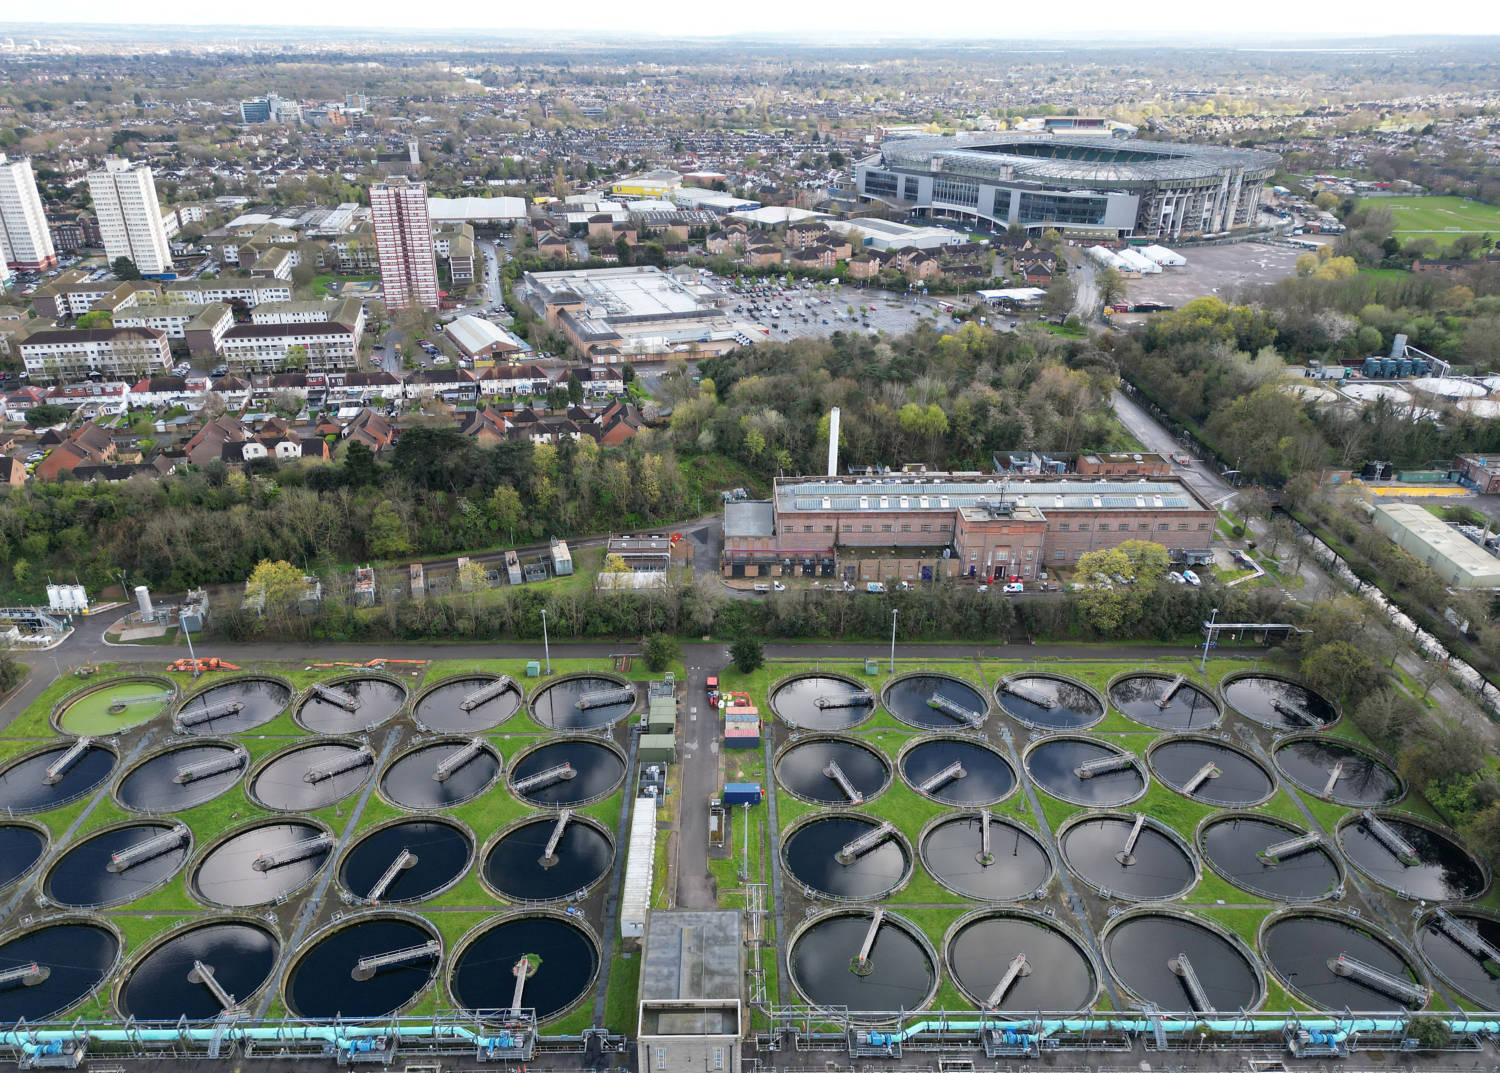 File Photo: A Drone View Shows Mogden Sewage Treatment Works, Owned By Thames Water, In West London